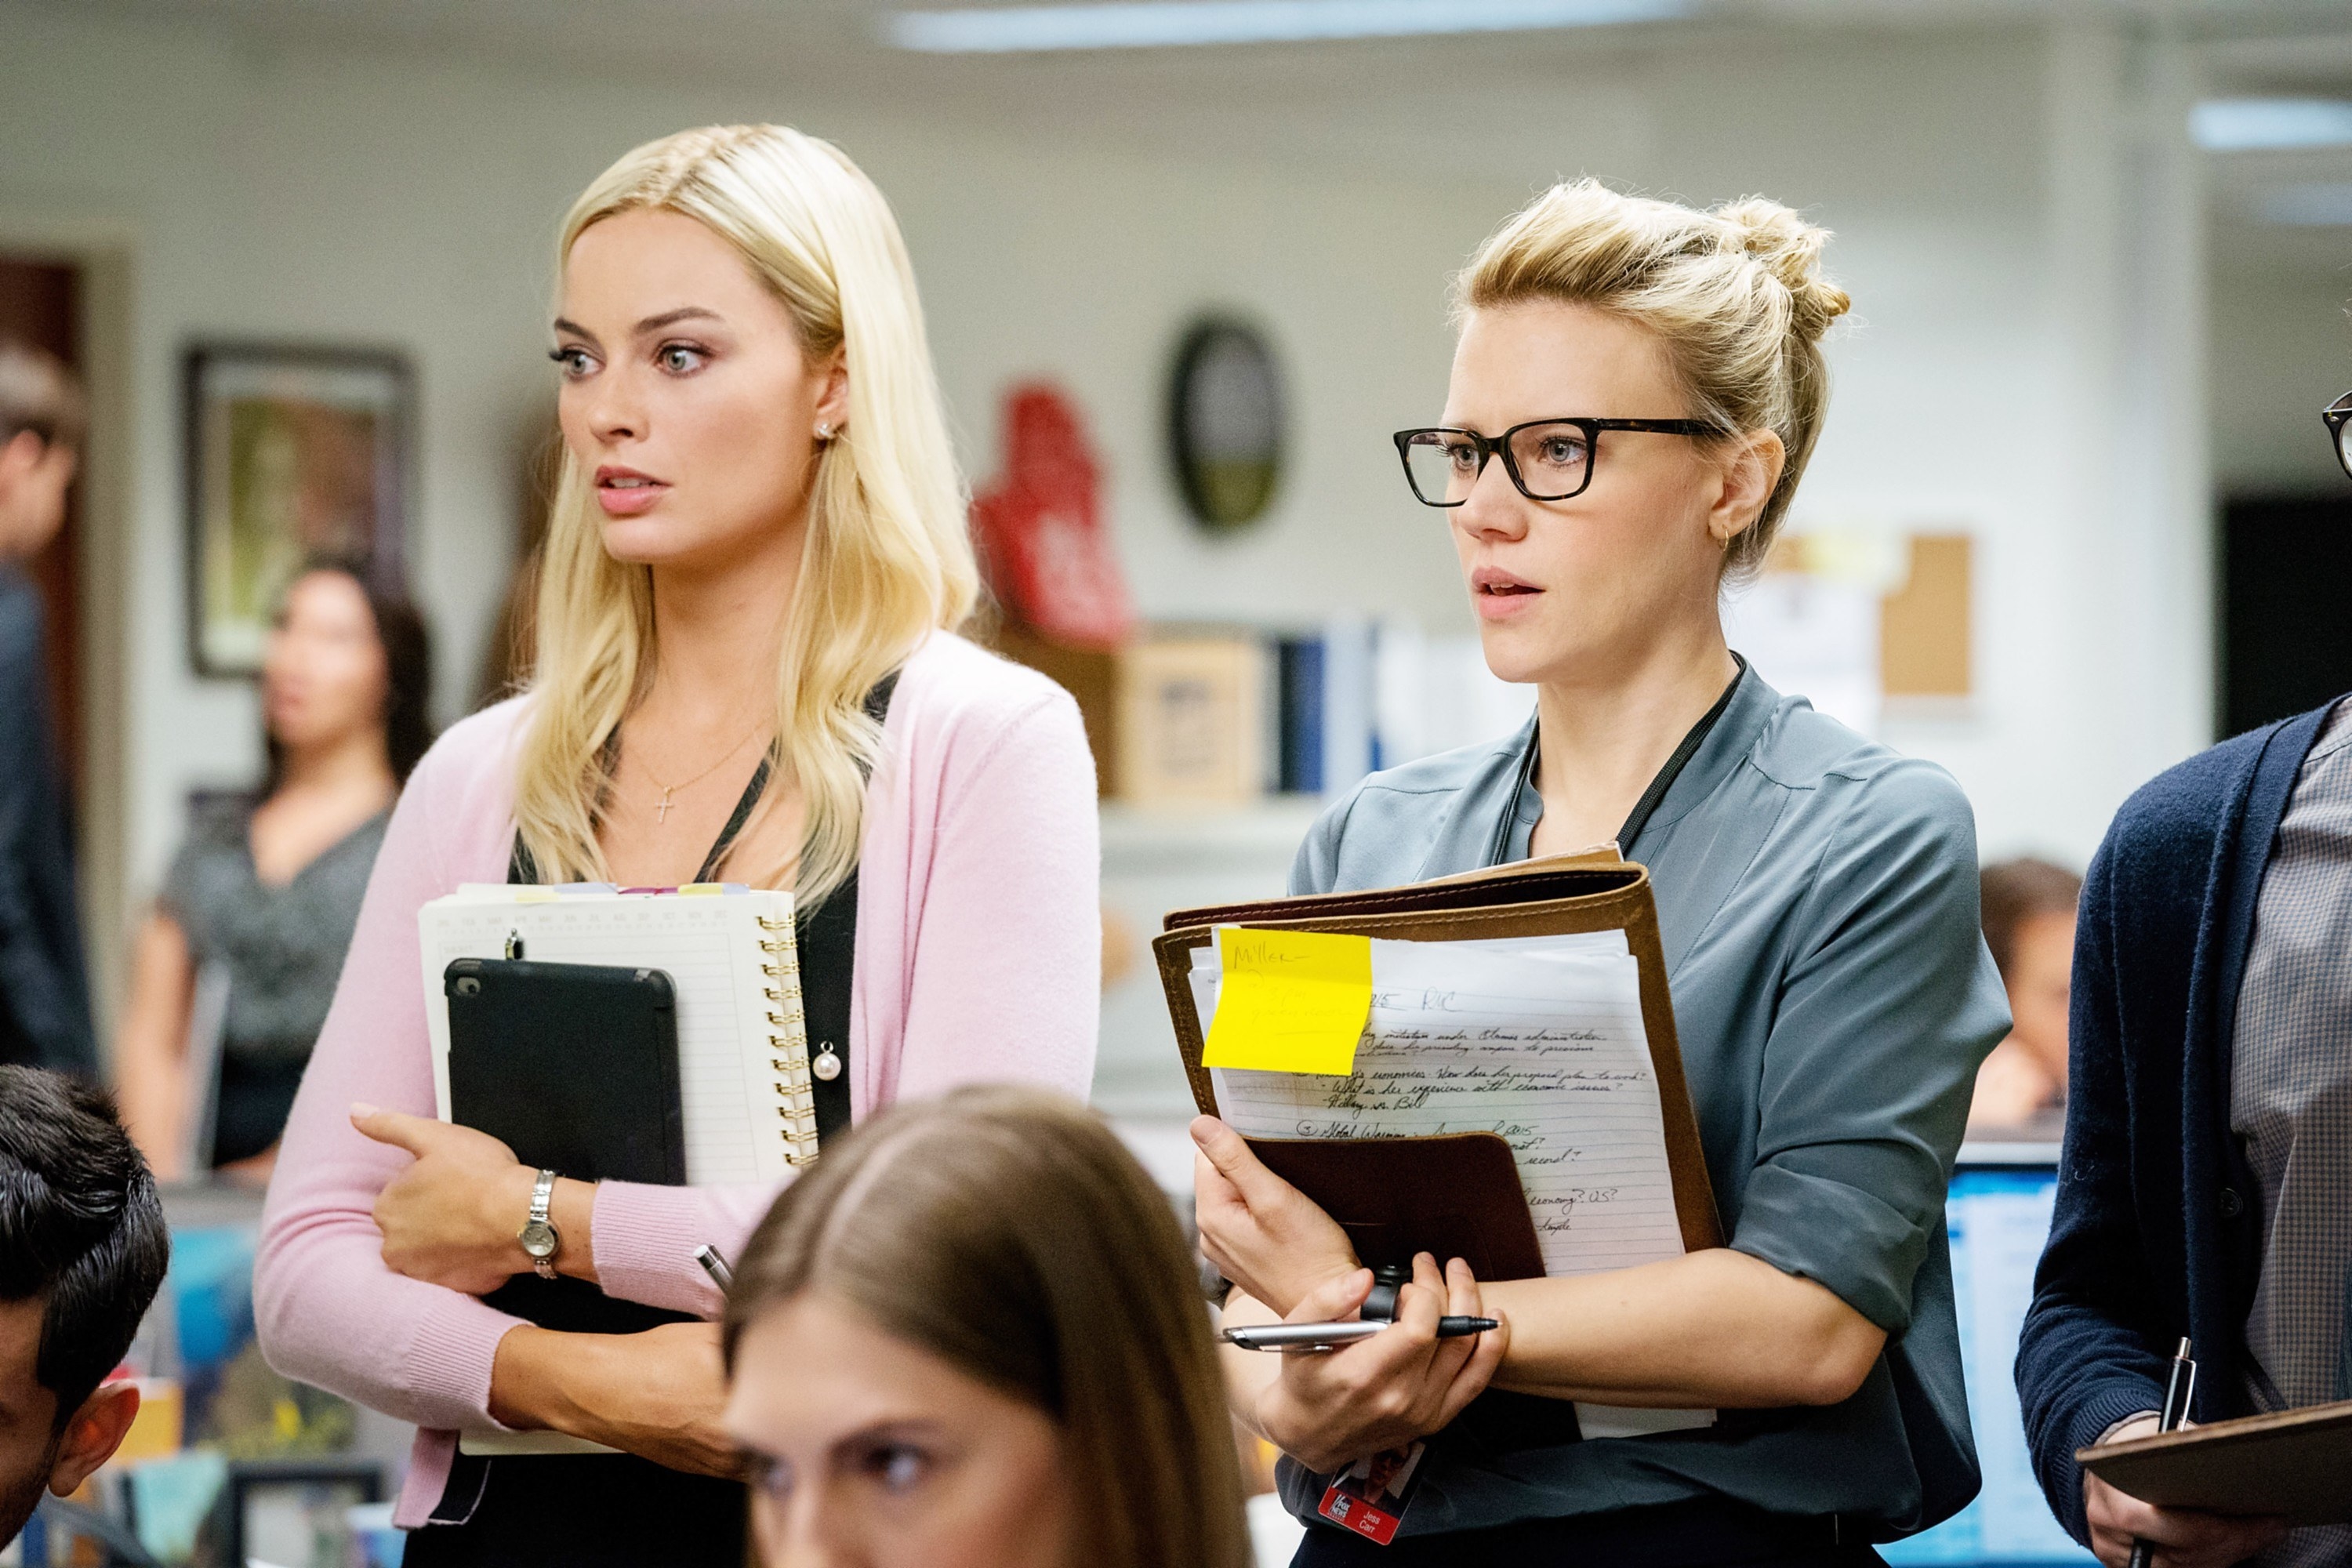 margot robbie and kate mckinnon in an office space